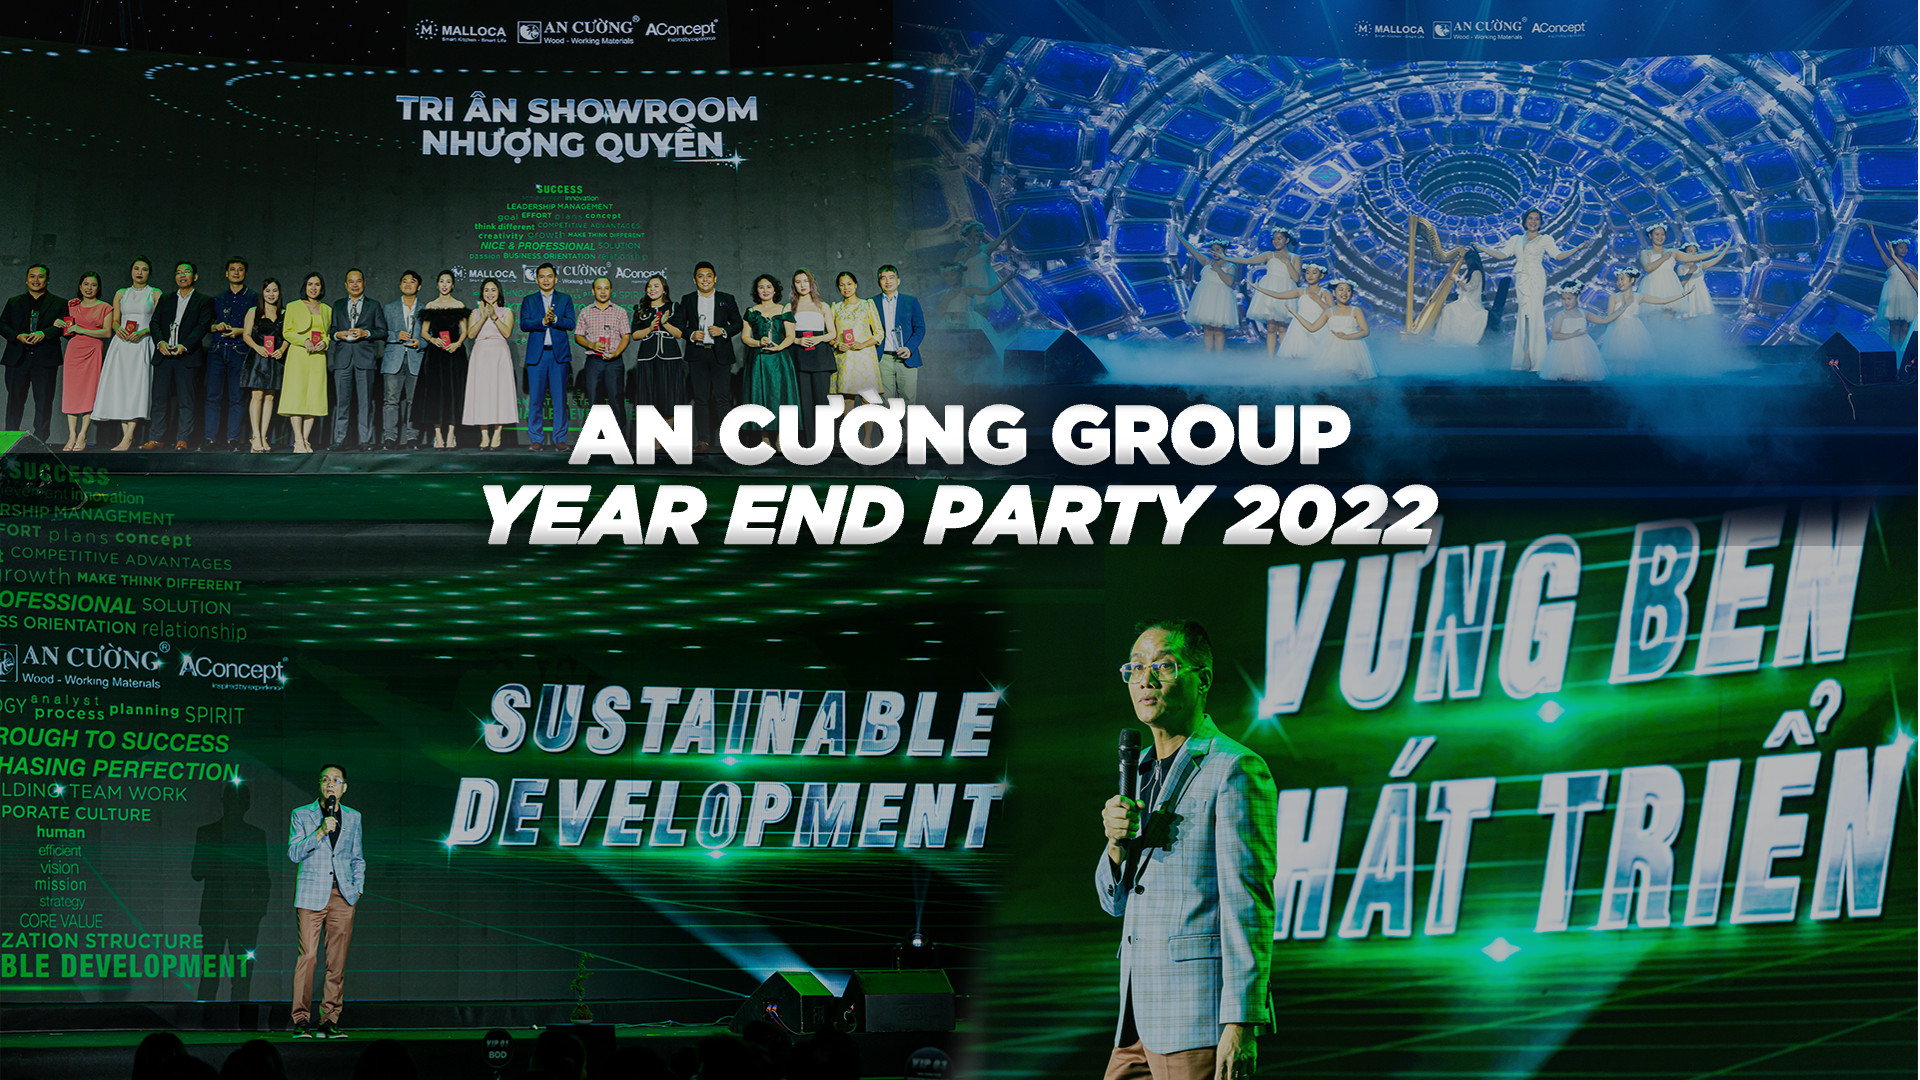 An Cường Group - Year End Party 2022